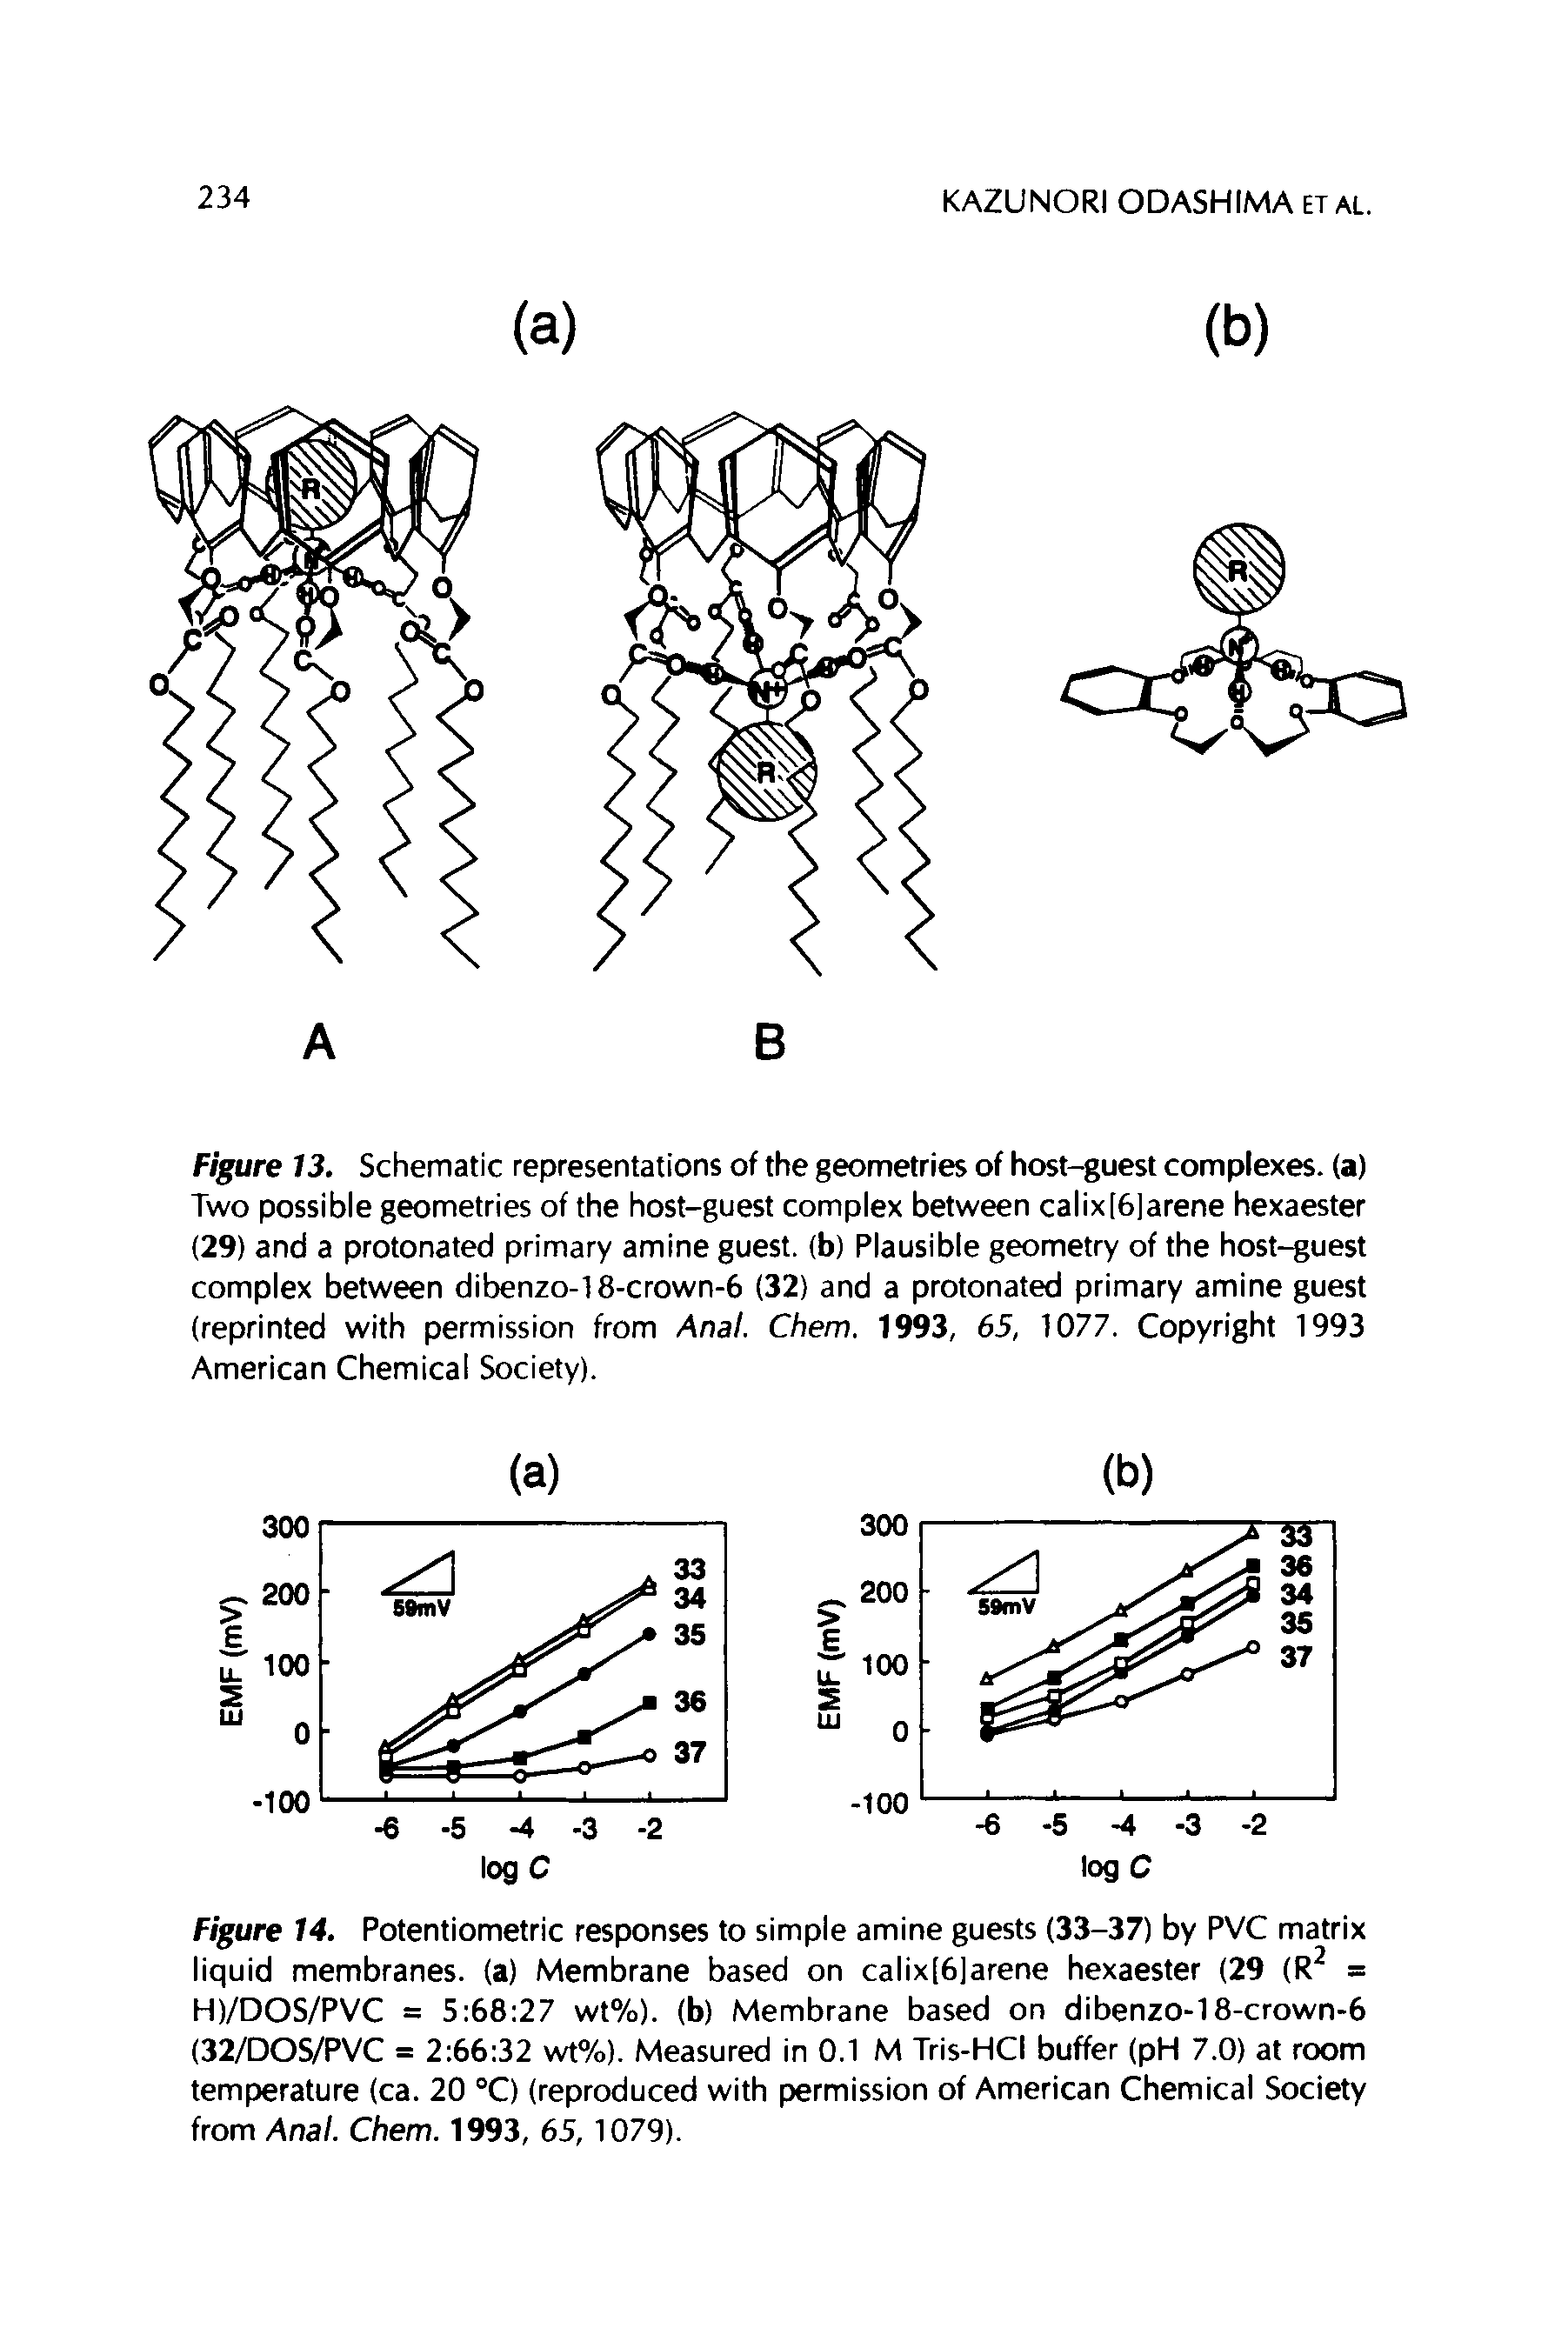 Figure 13. Schematic representations of the geometries of host-guest complexes, (a) Two possible geometries of the host-guest complex between calix[6jarene hexaester (29) and a protonated primary amine guest, (b) Plausible geometry of the host-guest complex between dibenzo-18-crown-6 (32) and a protonated primary amine guest...